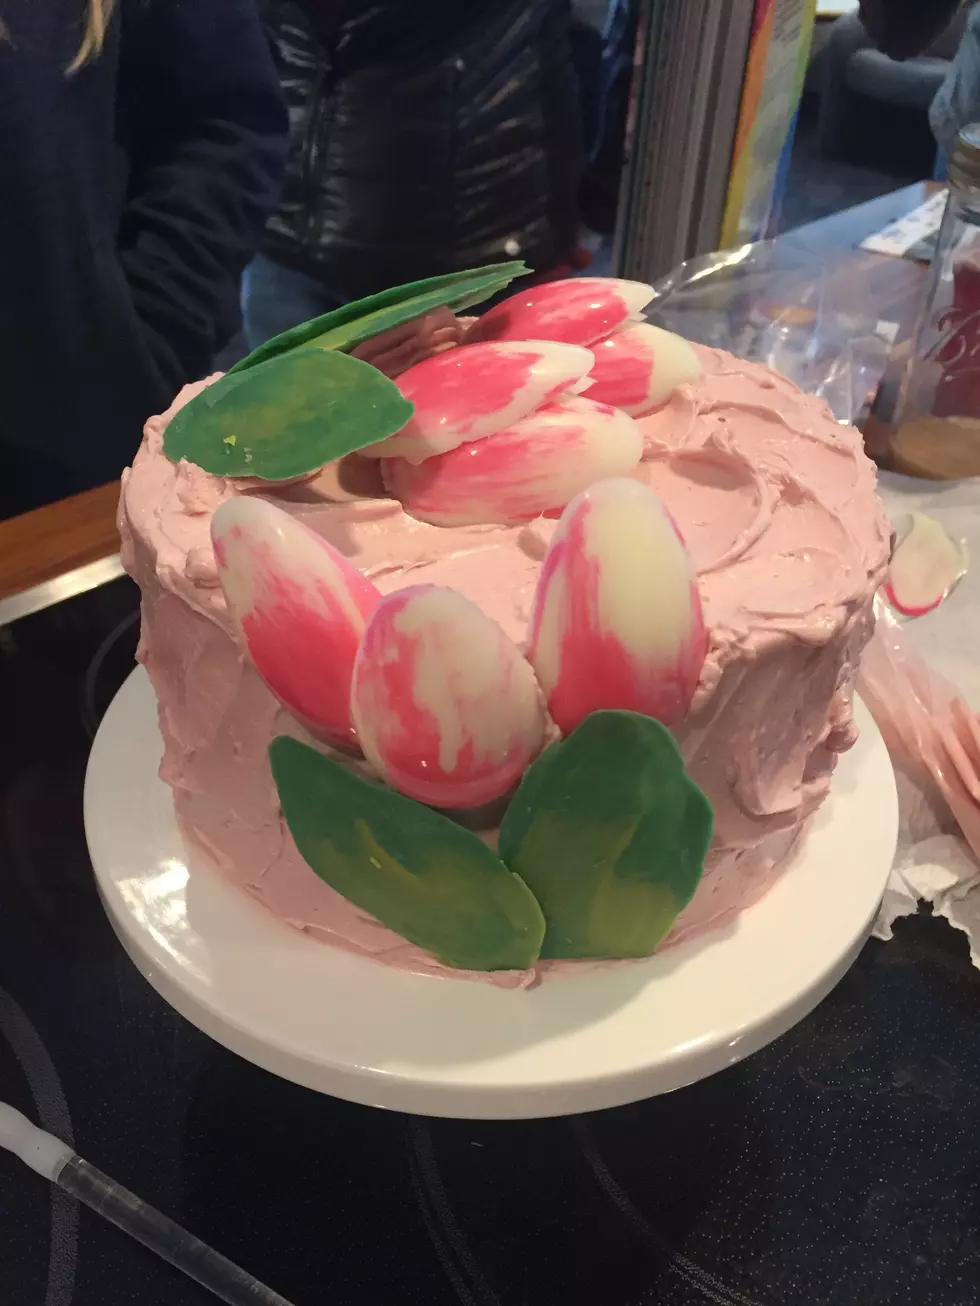 NH Chef Taught Some Very Easy Ways to Decorate A Cake &#8211; Even I Could Do It